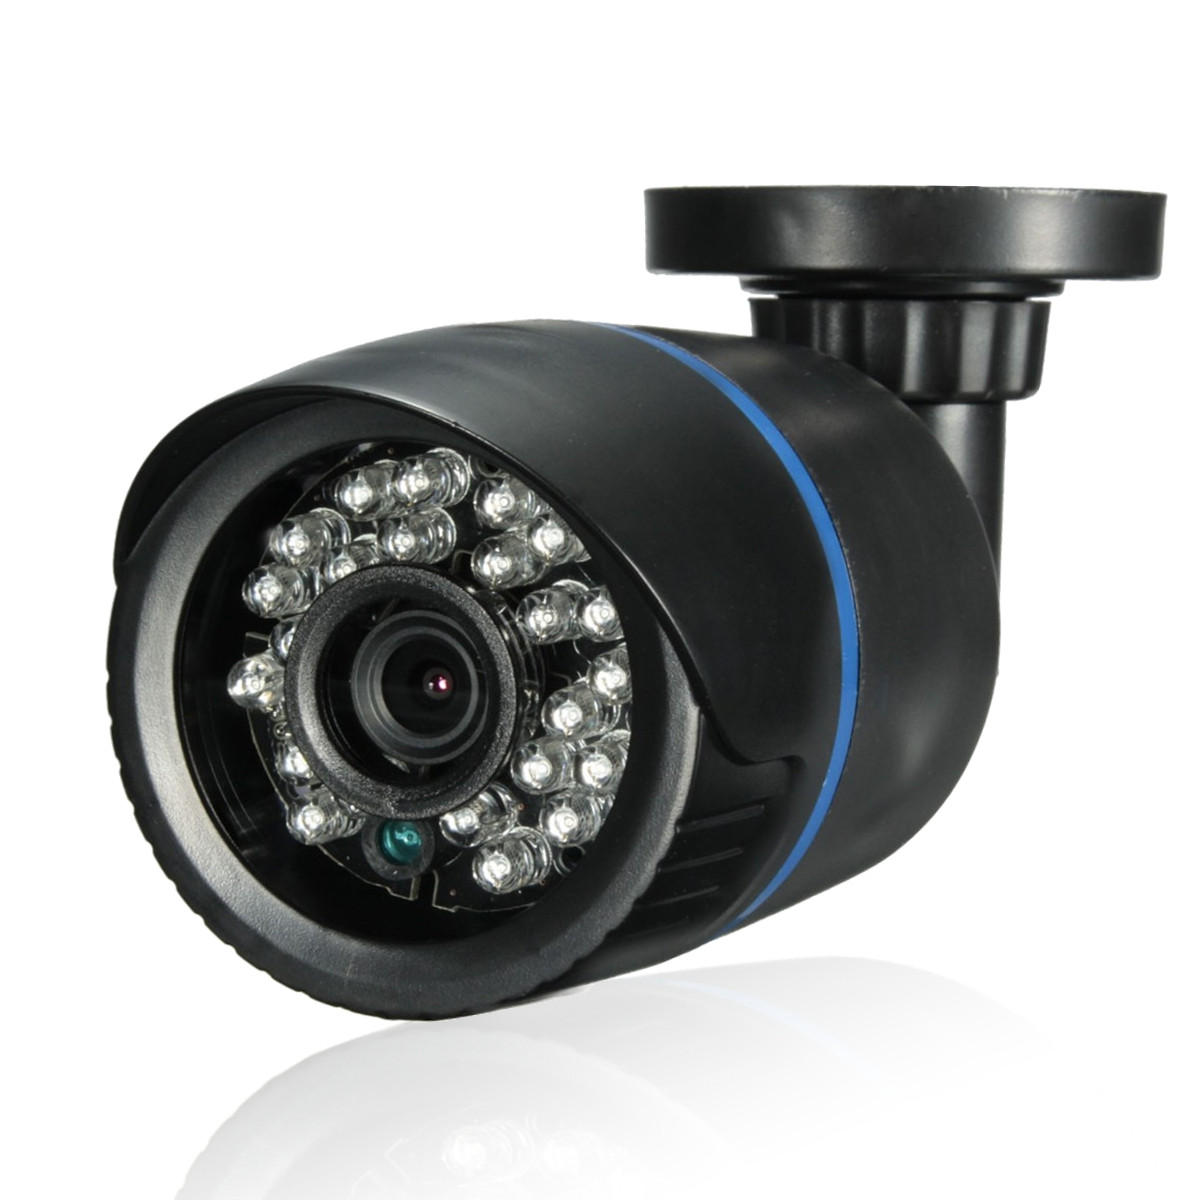 ip camera for sale